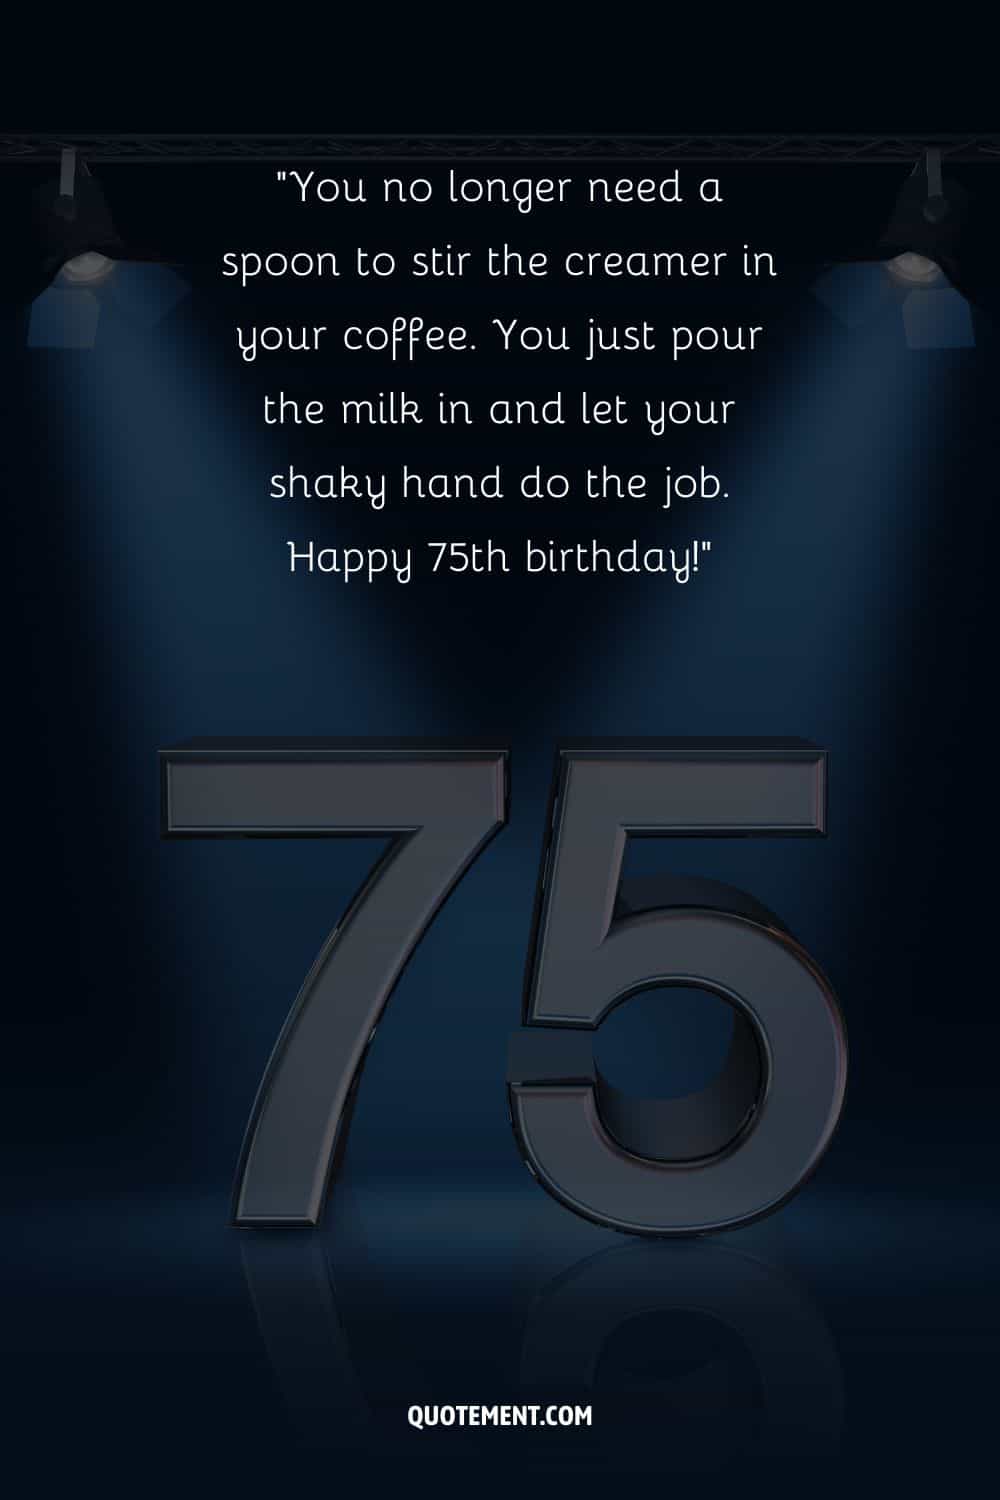 “You no longer need a spoon to stir the creamer in your coffee. You just pour the milk in and let your shaky hand do the job. Happy 75th birthday!”